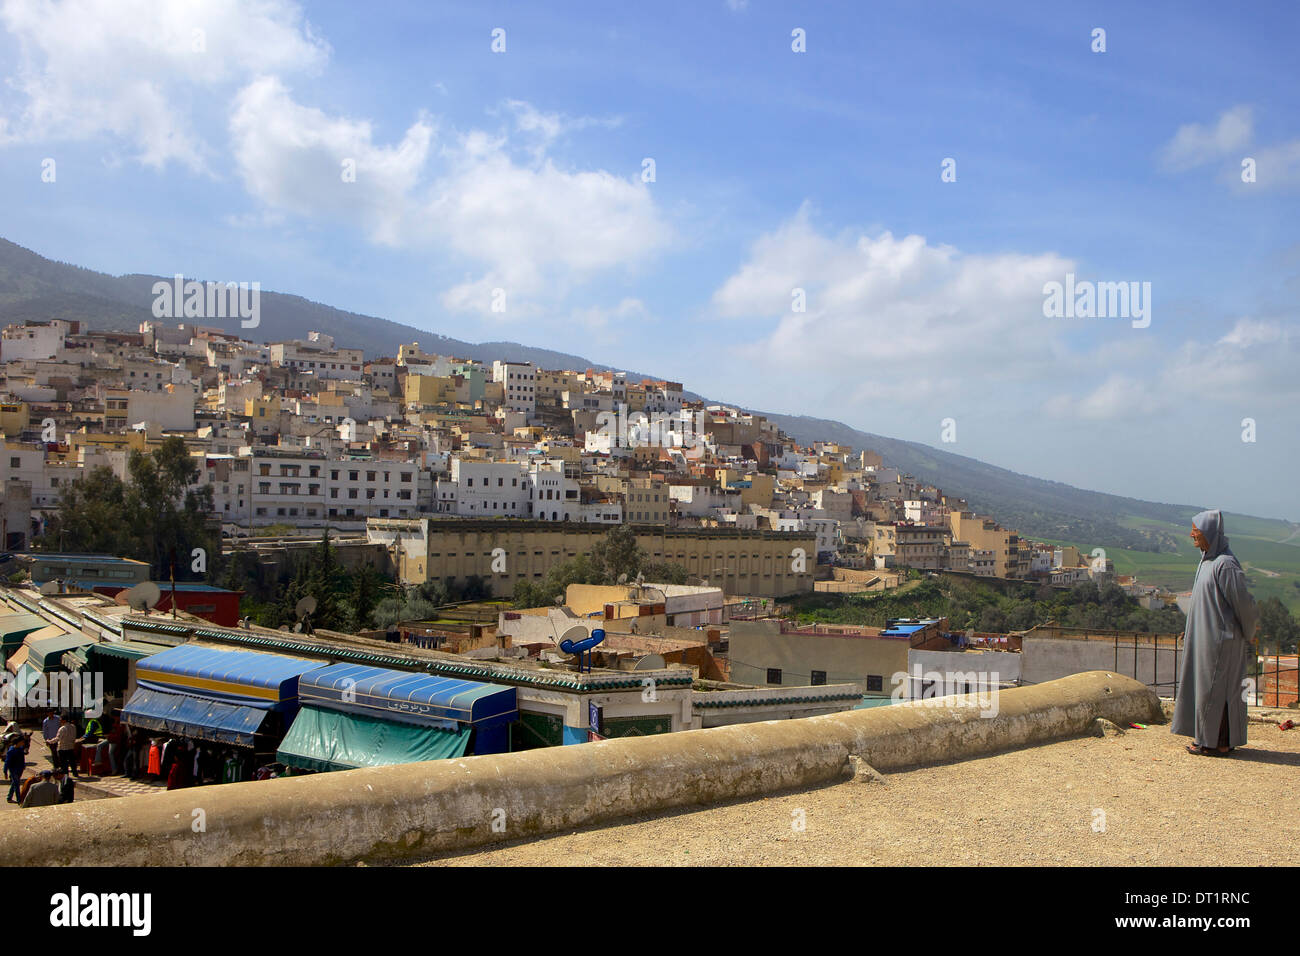 A man overlooking, Idriss, Morocco, North Africa, Africa Stock Photo